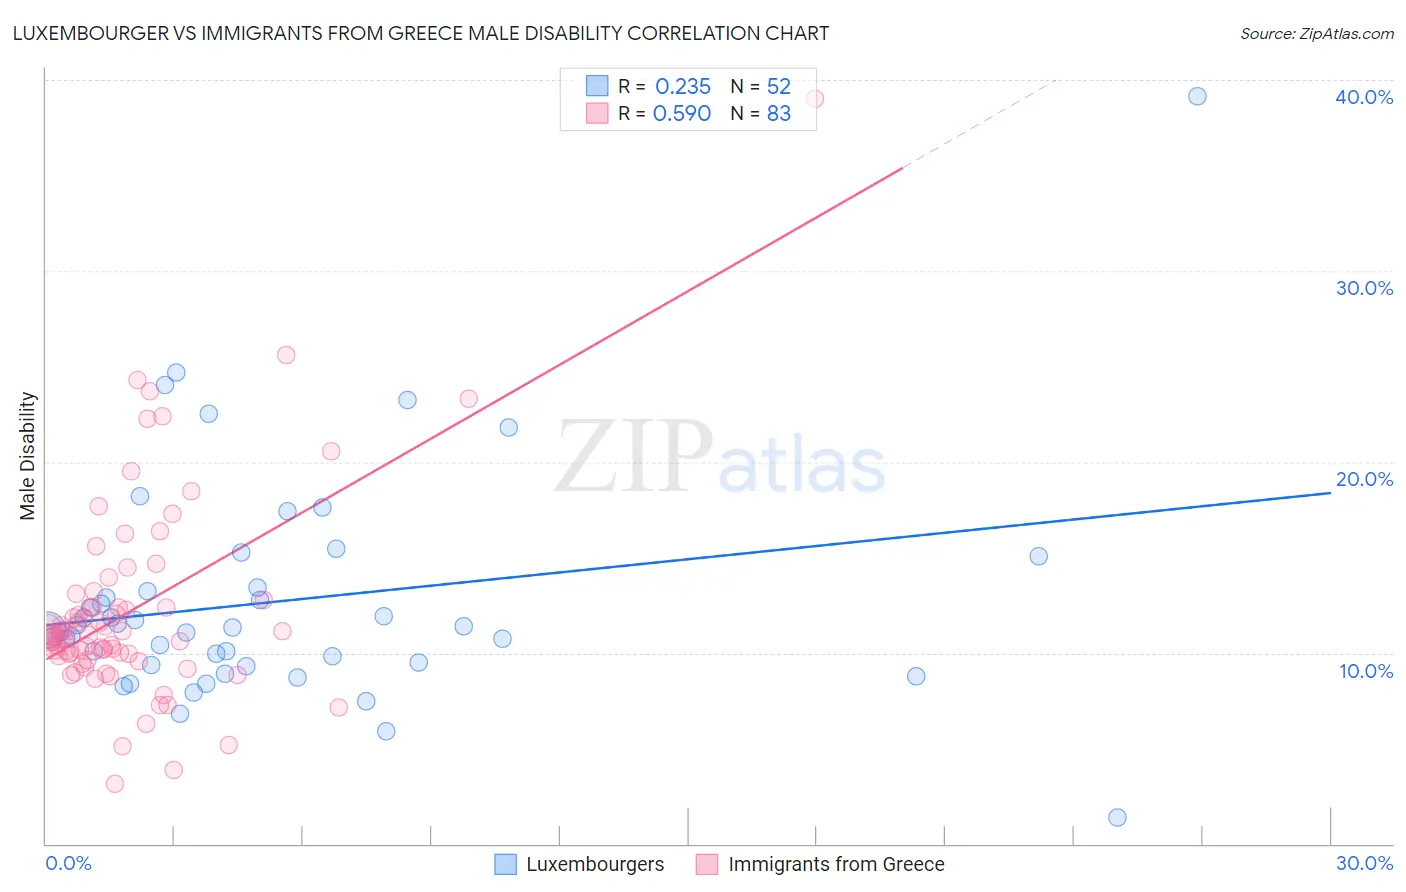 Luxembourger vs Immigrants from Greece Male Disability